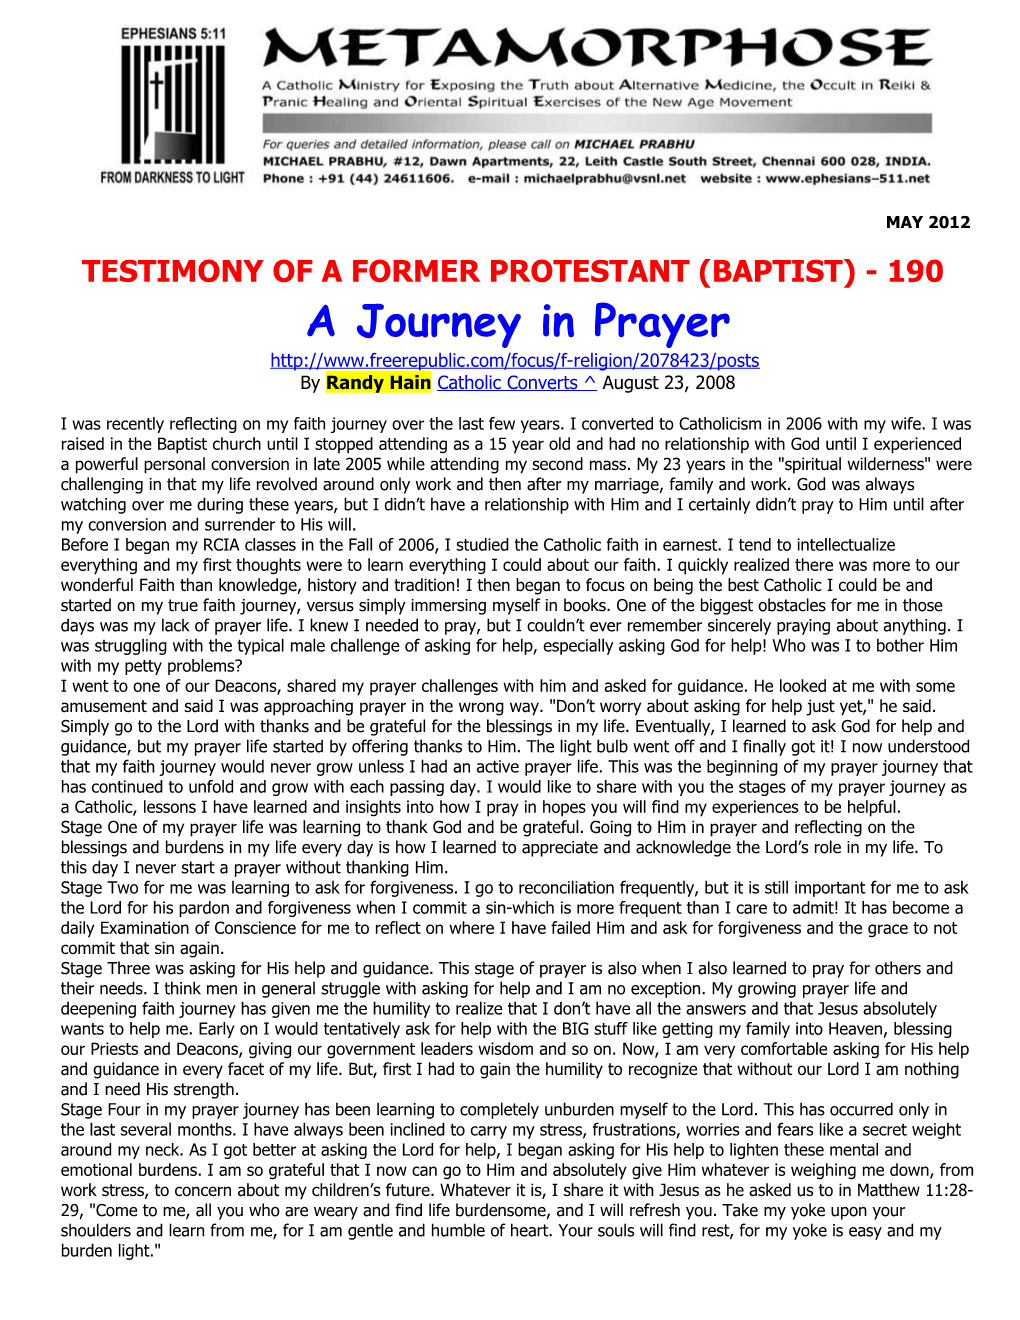 Testimony of a Former Protestant (Baptist) - 190